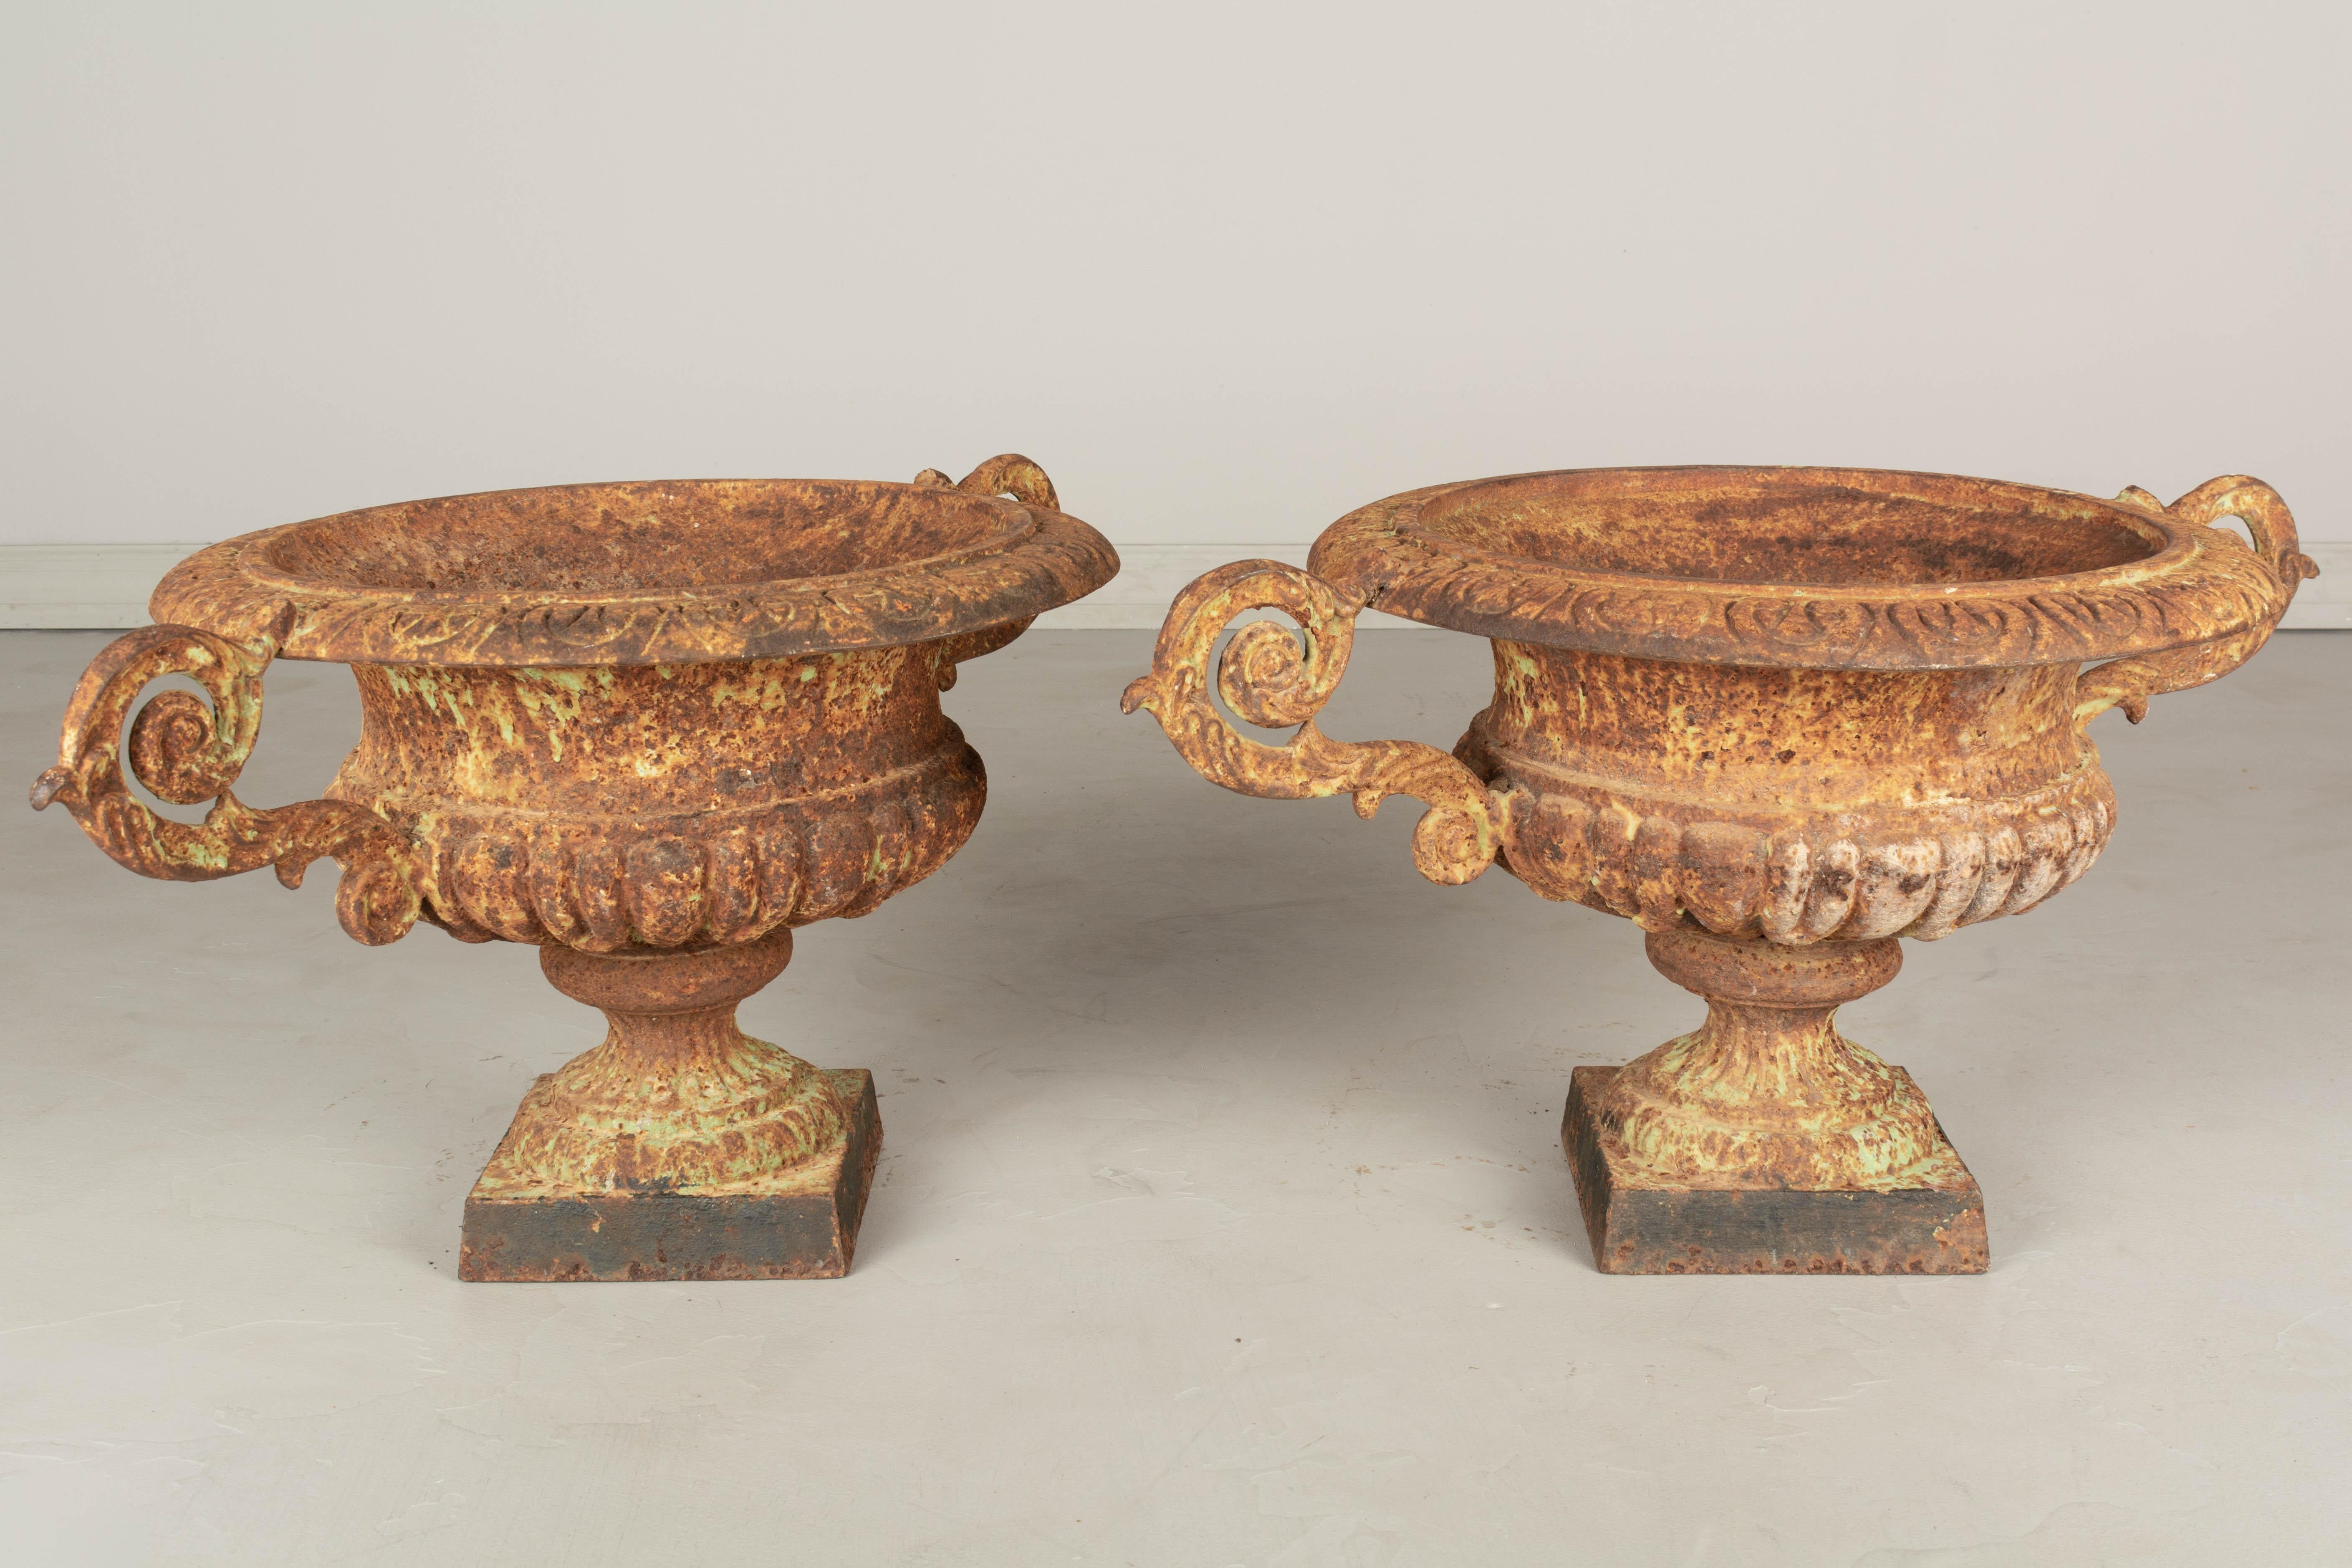 A pair of 19th century French cast iron garden urn planters, with weathered rusted patina and remnants of light green paint. Nicely cast details, especially on the double handles. 
14